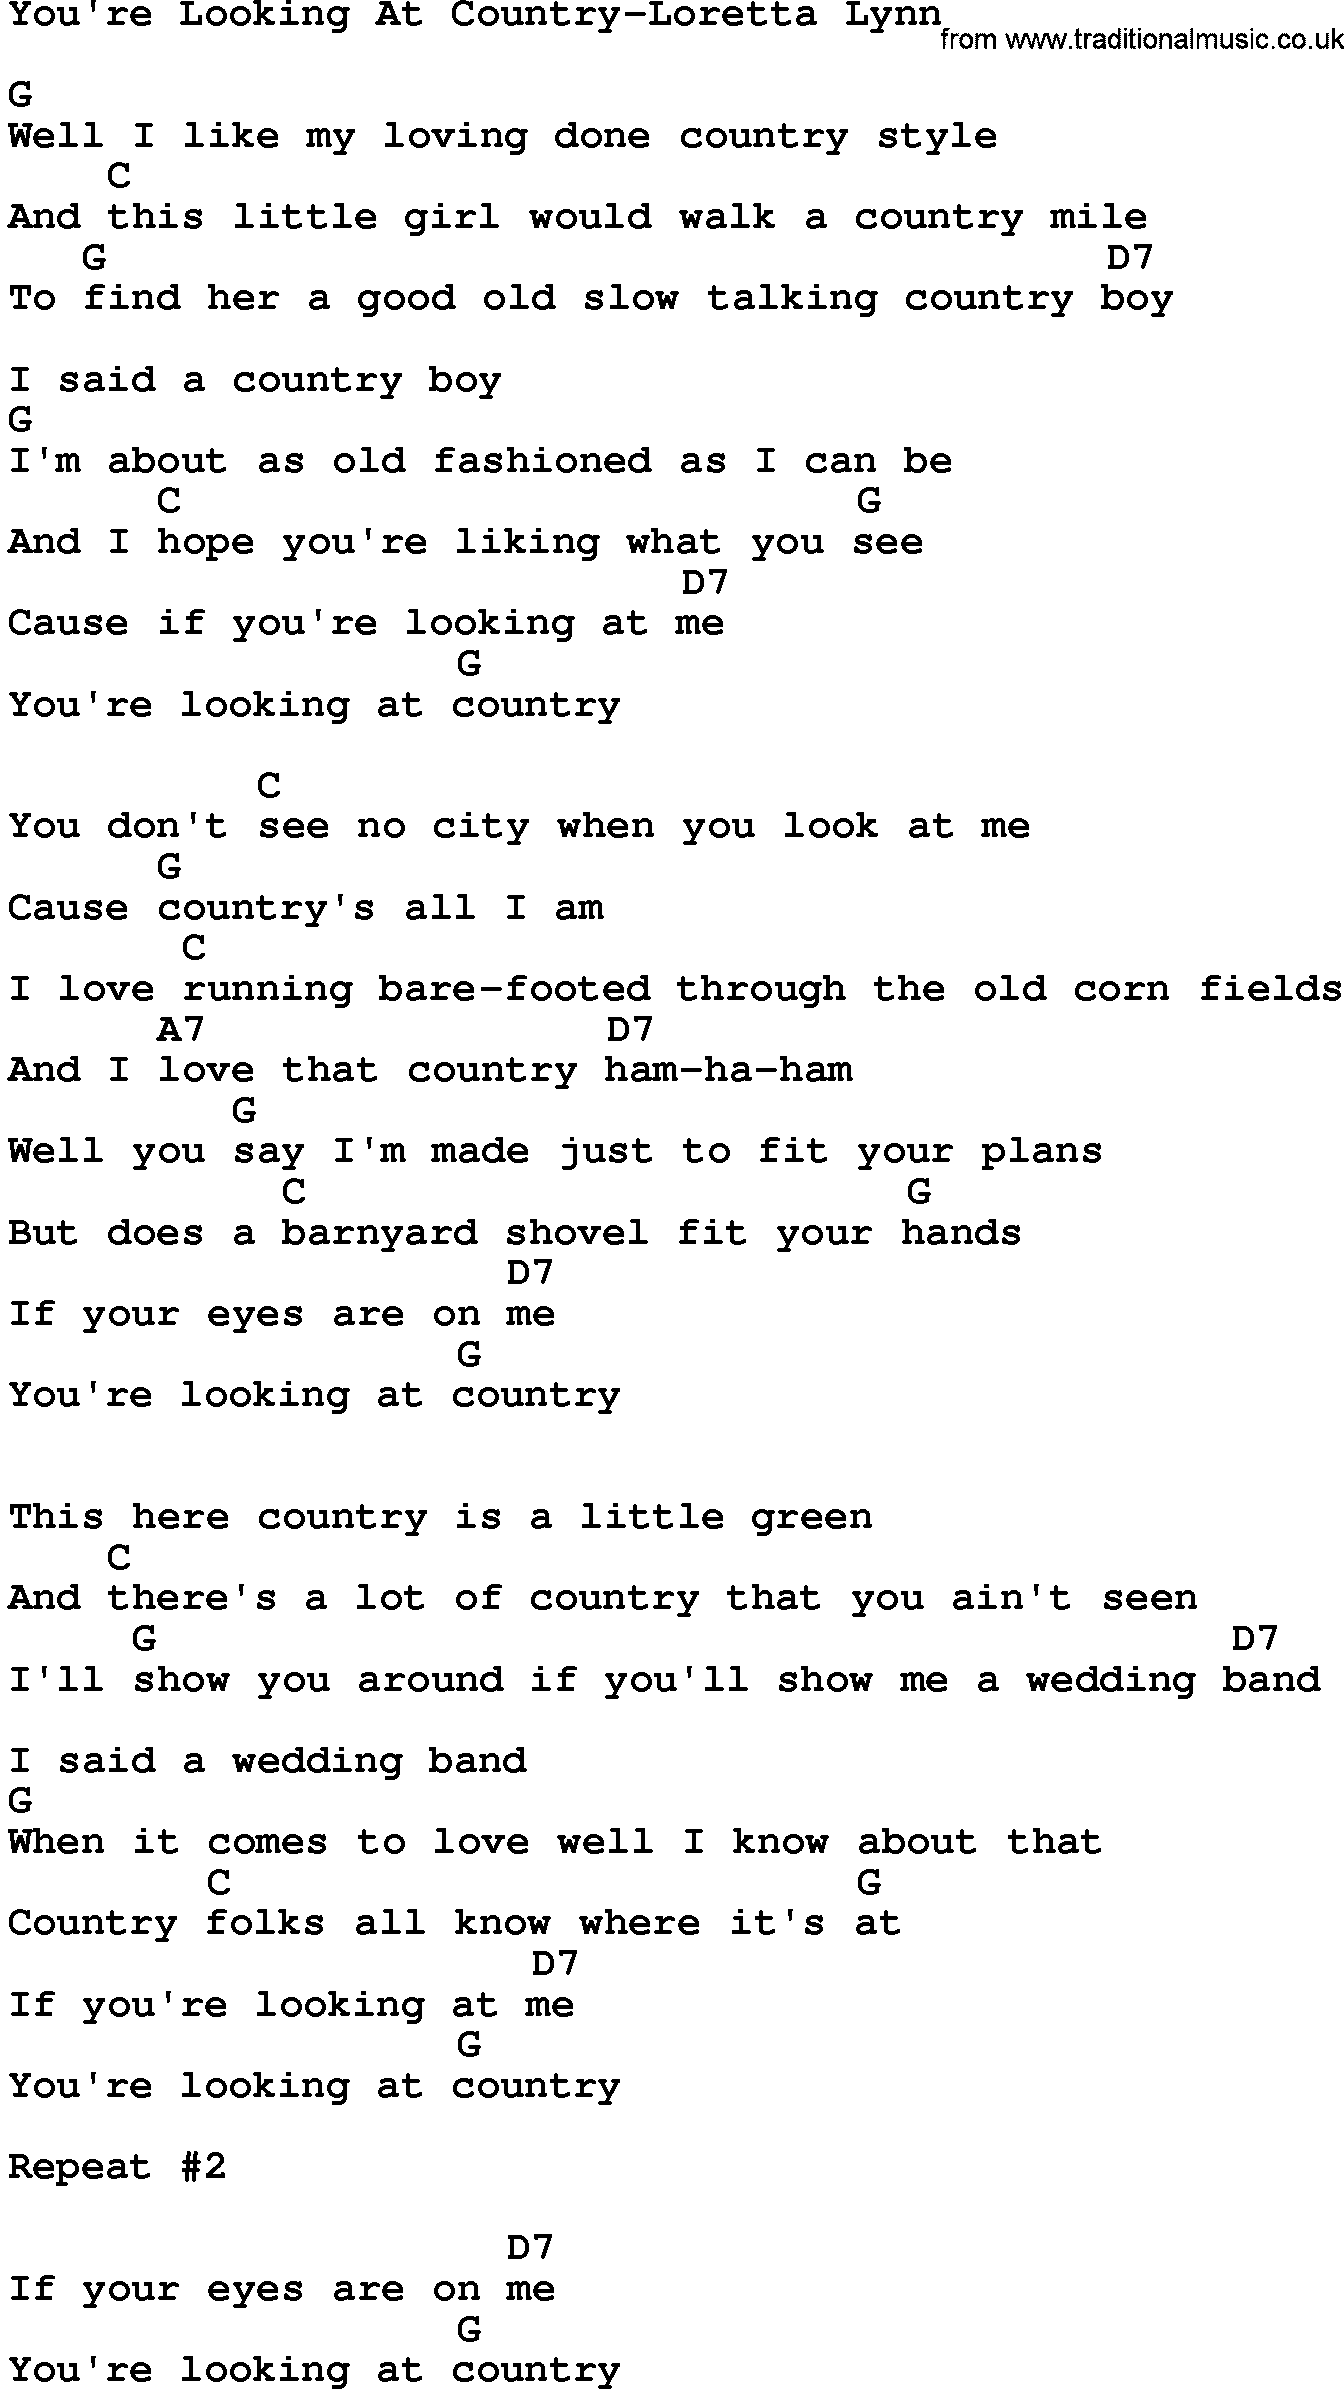 Country music song: You're Looking At Country-Loretta Lynn lyrics and chords